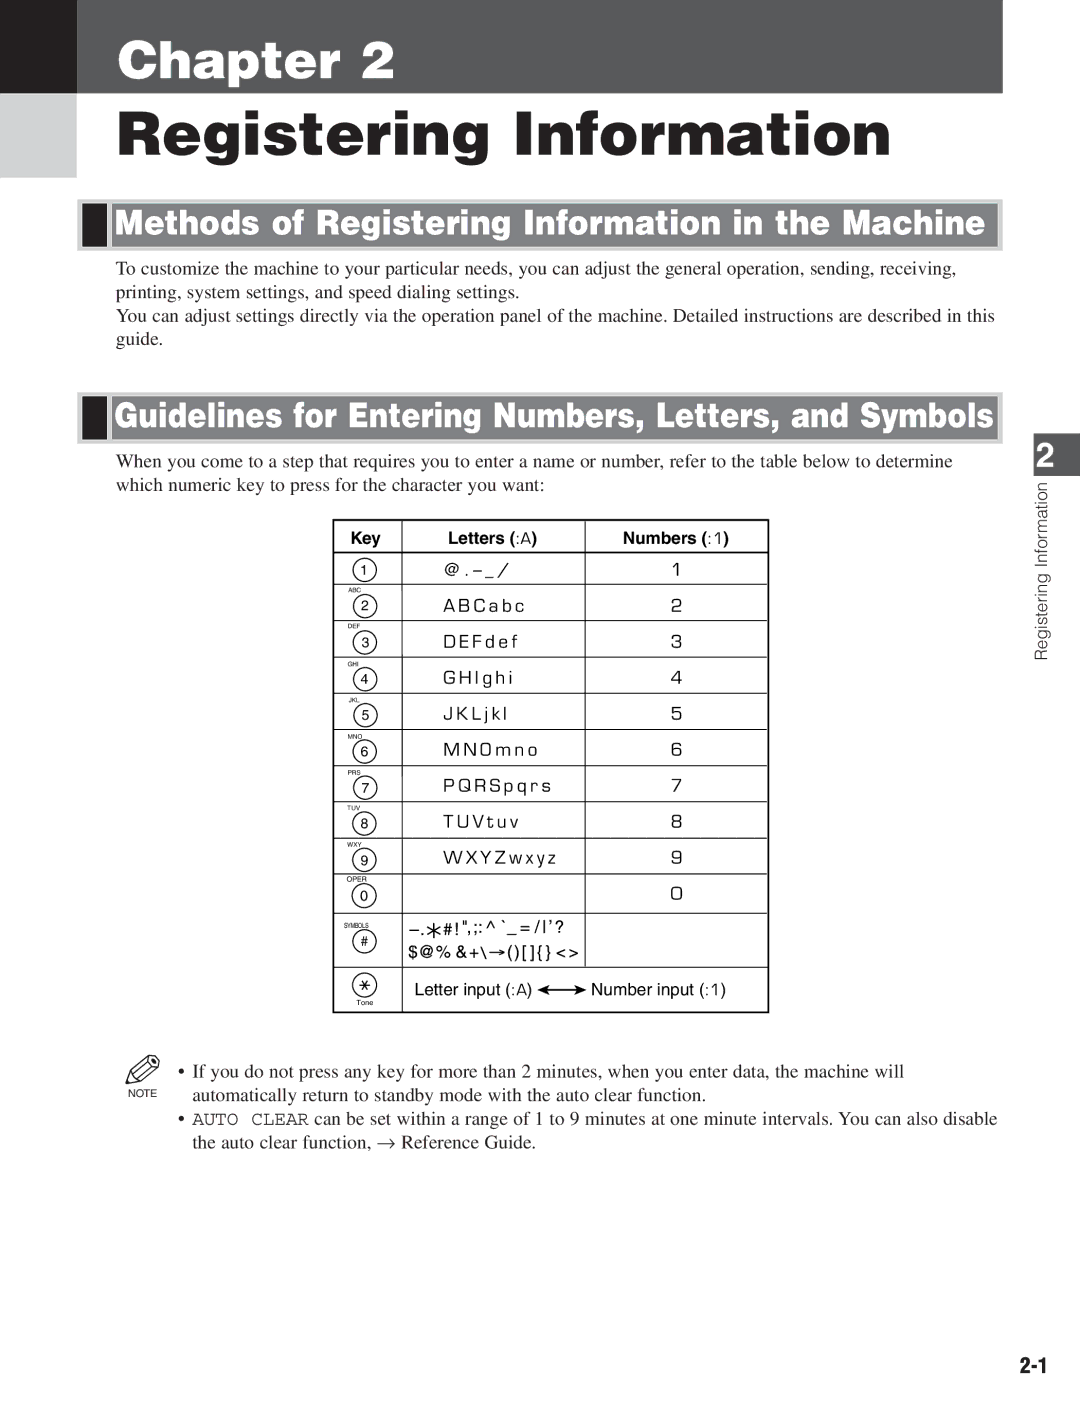 Canon D680 Methods of Registering Information in the Machine, Guidelines for Entering Numbers, Letters, and Symbols 